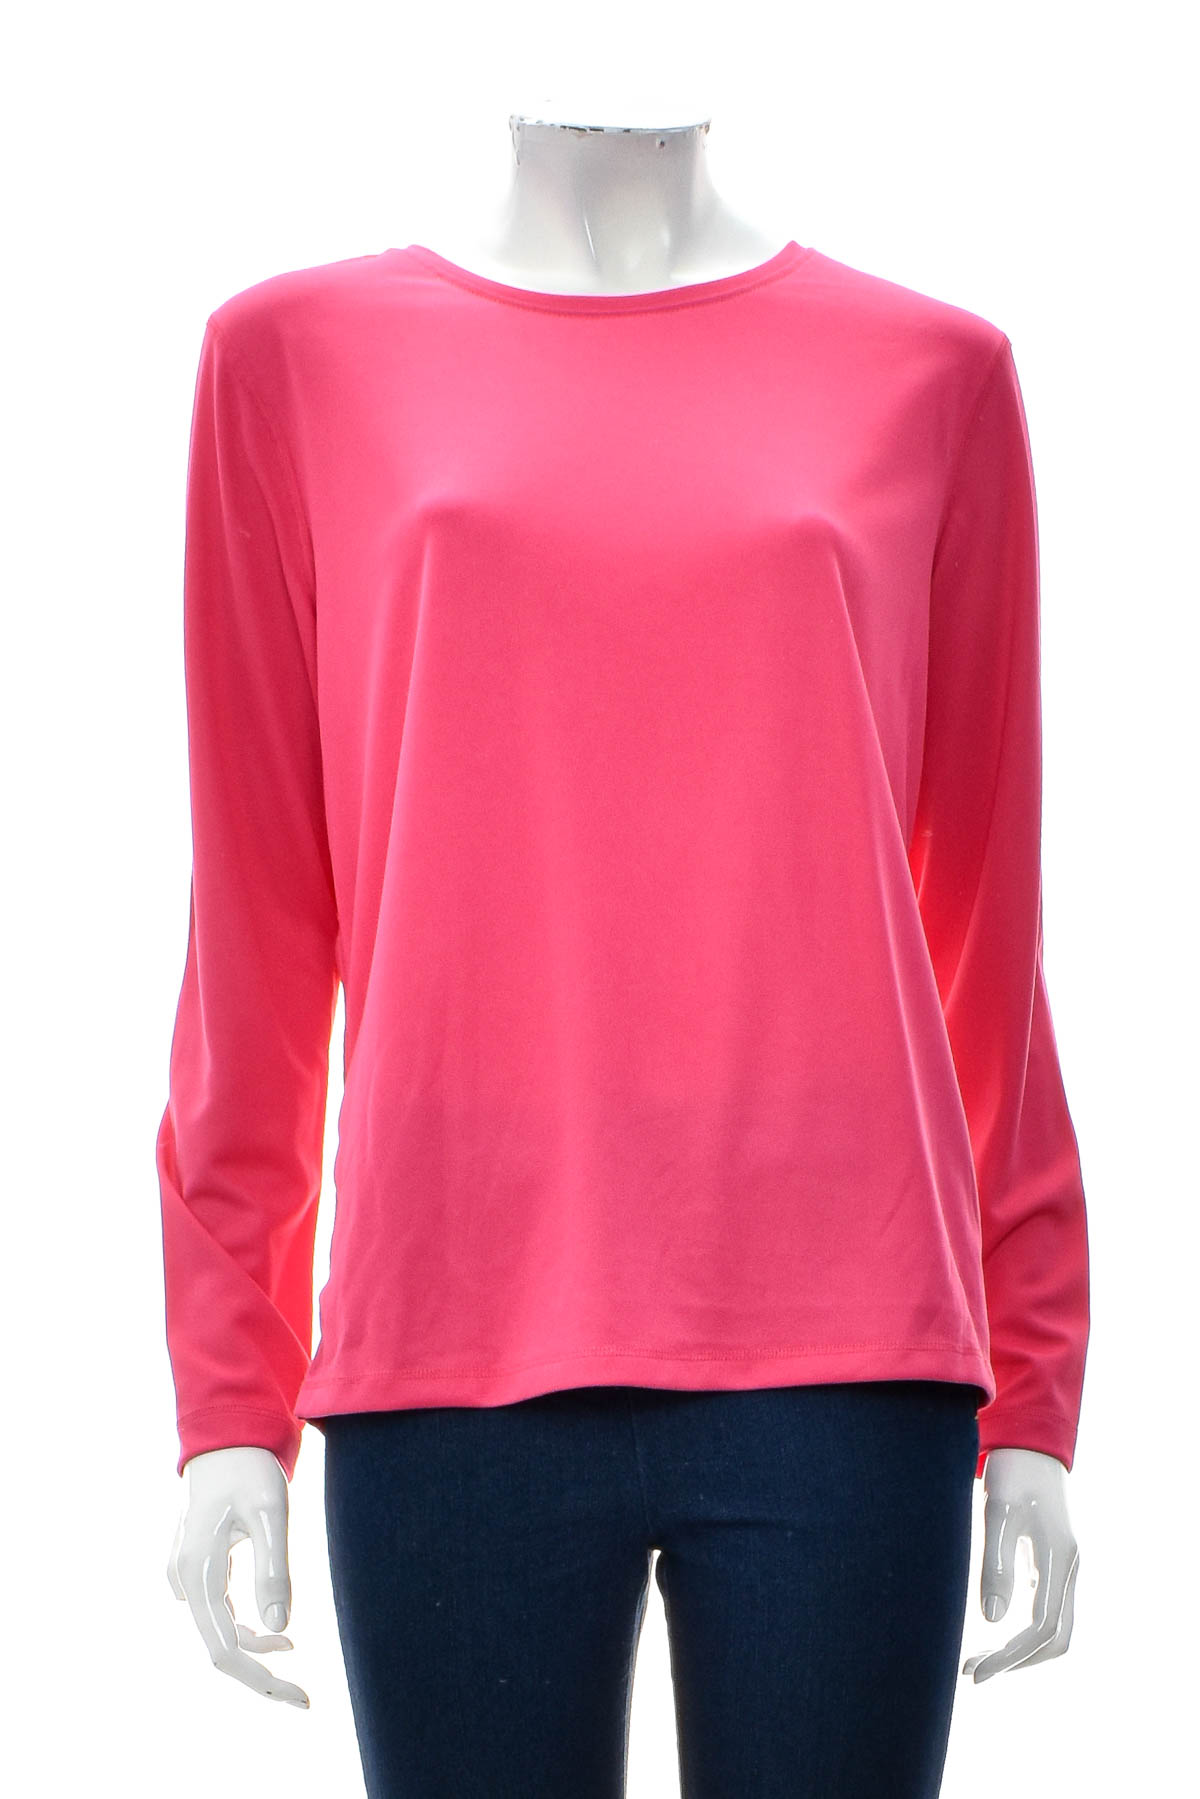 Women's blouse - Athletic Works - 0